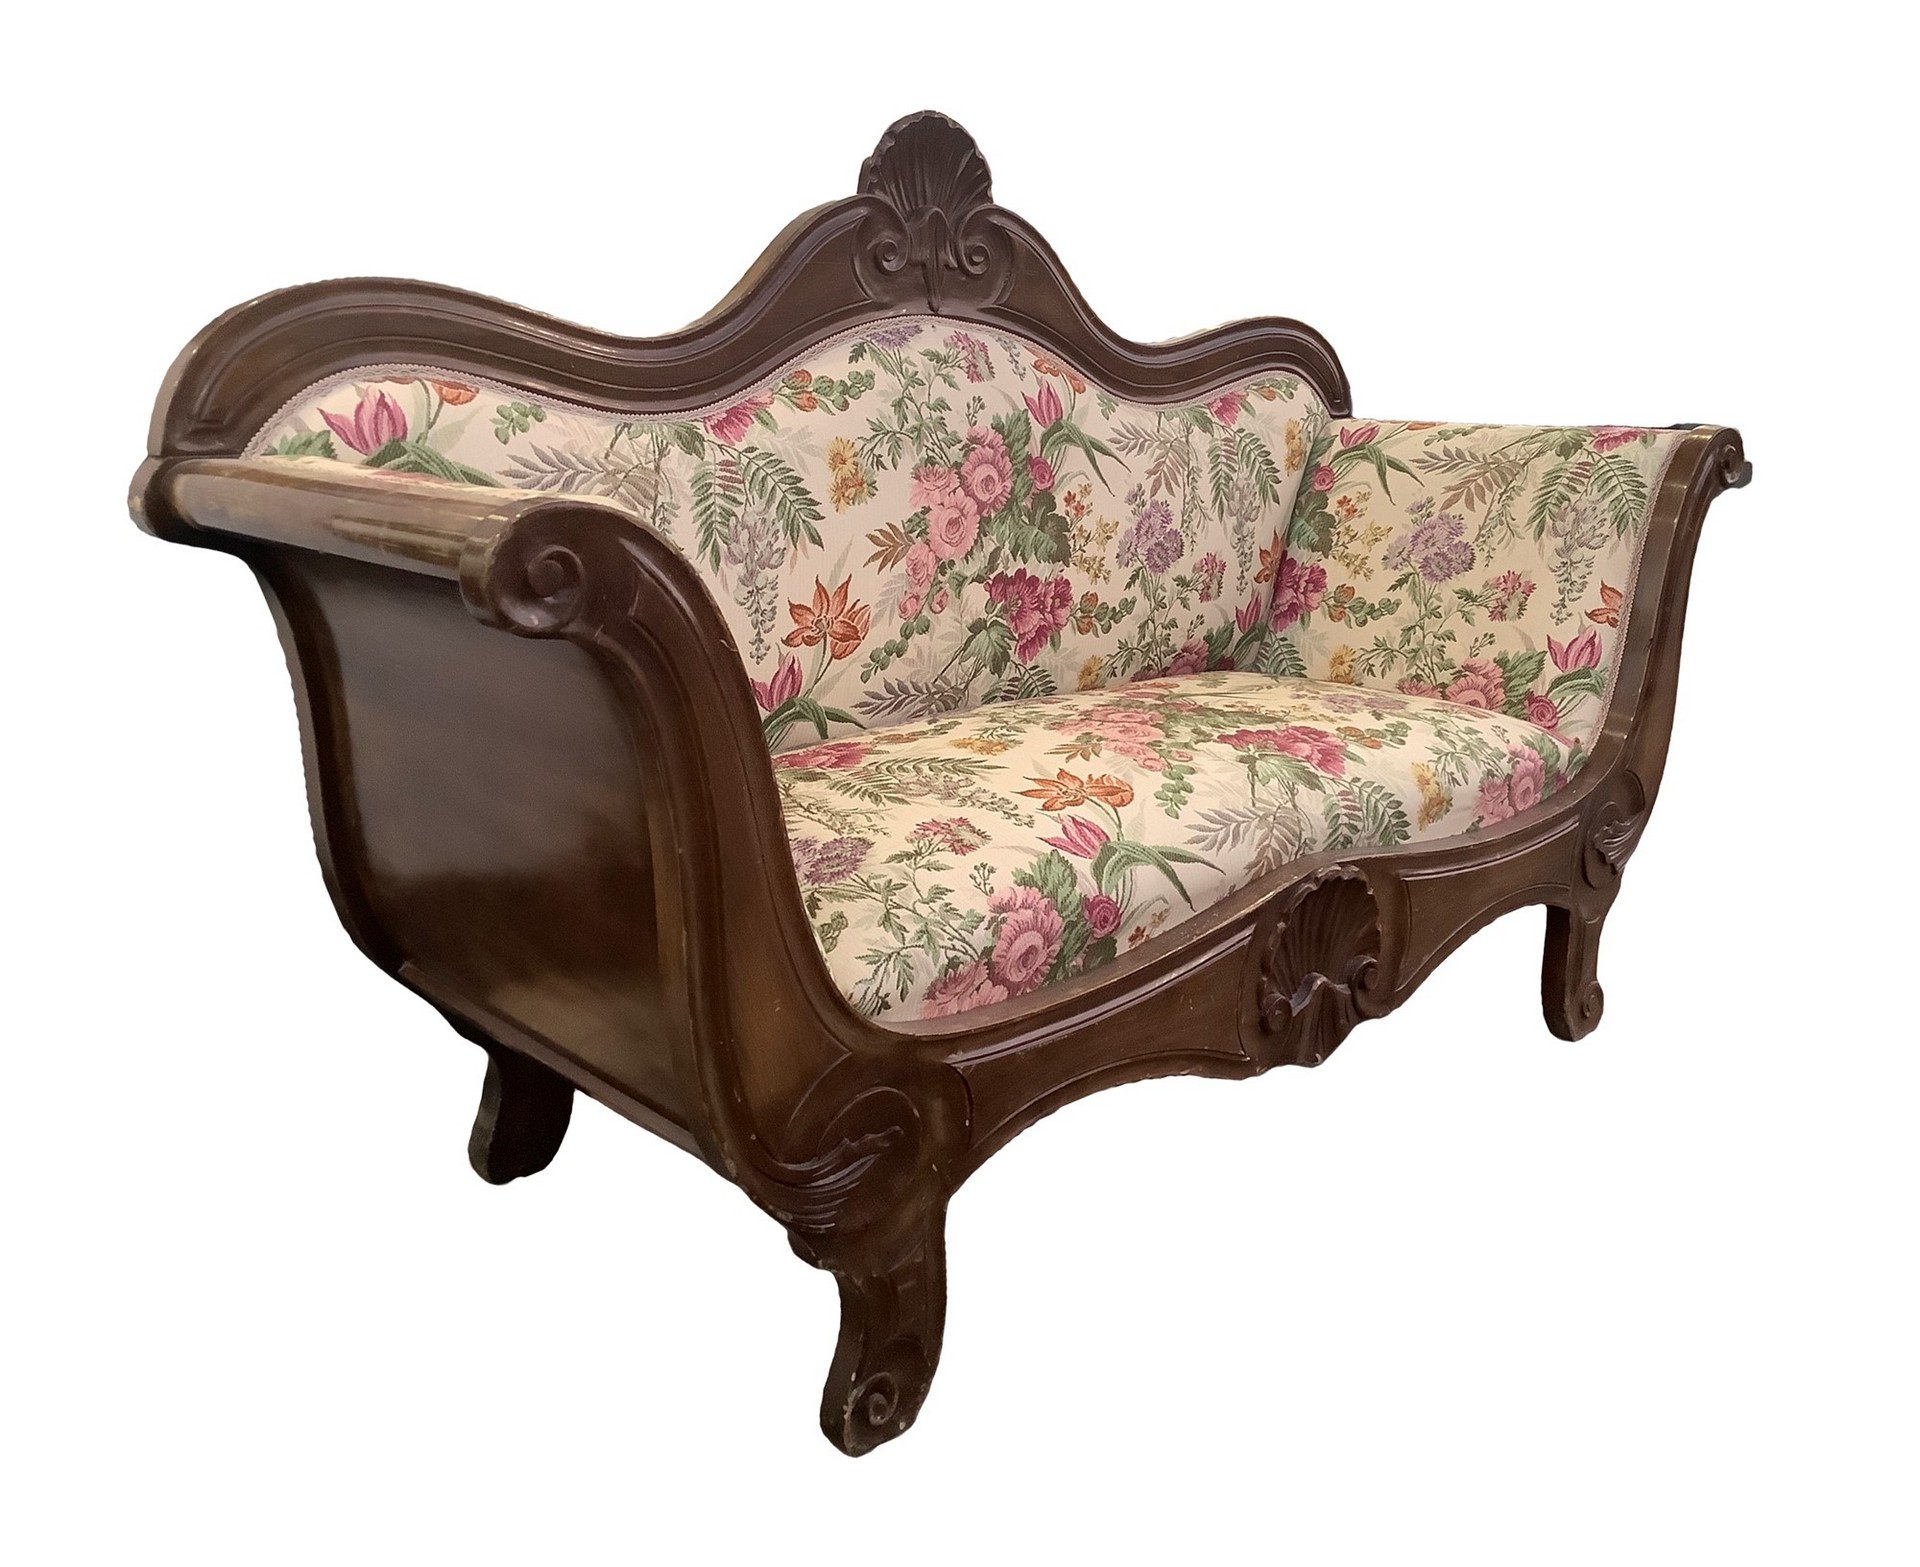 Two-seater sofa in Louis Philippe style walnut wood, early 20th century - Image 2 of 4